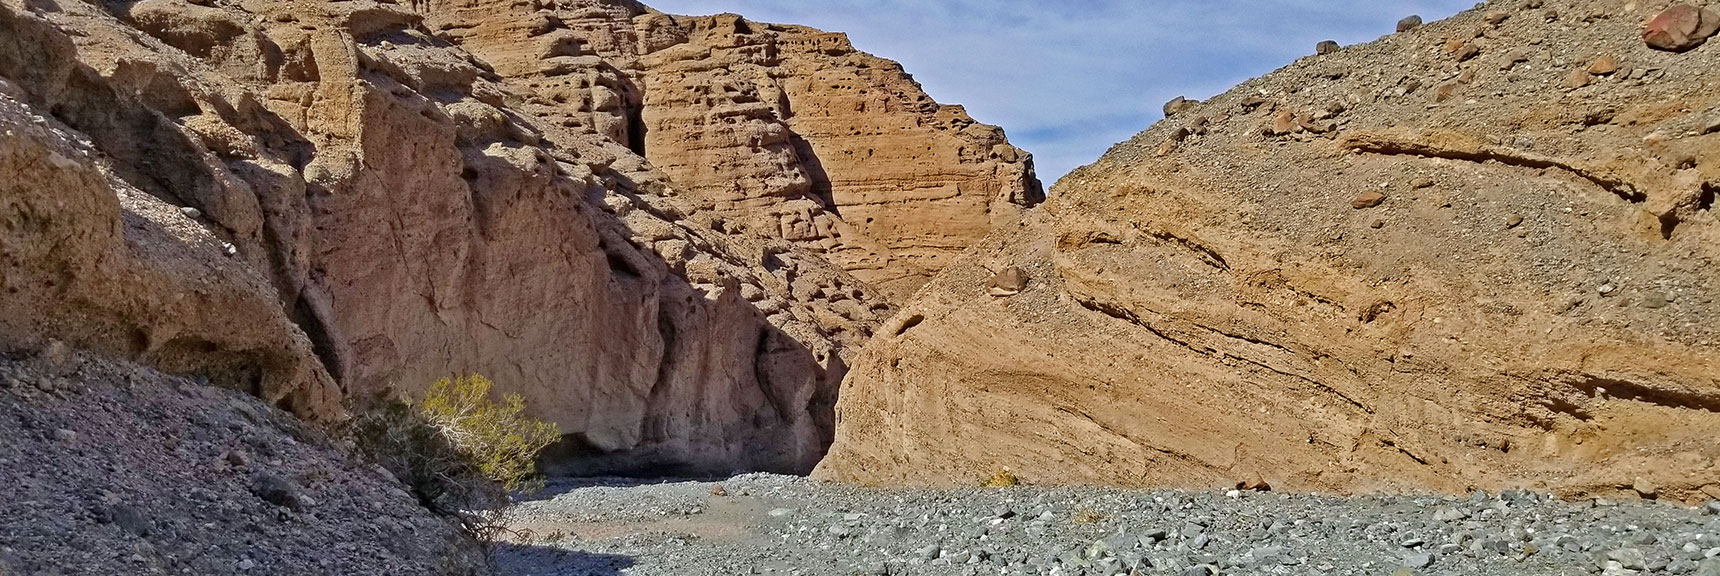 Looking Back at Beautiful Section of Canyon. Lighting Best in Downward Direction. | Willow Canyon | Death Valley National Park, California